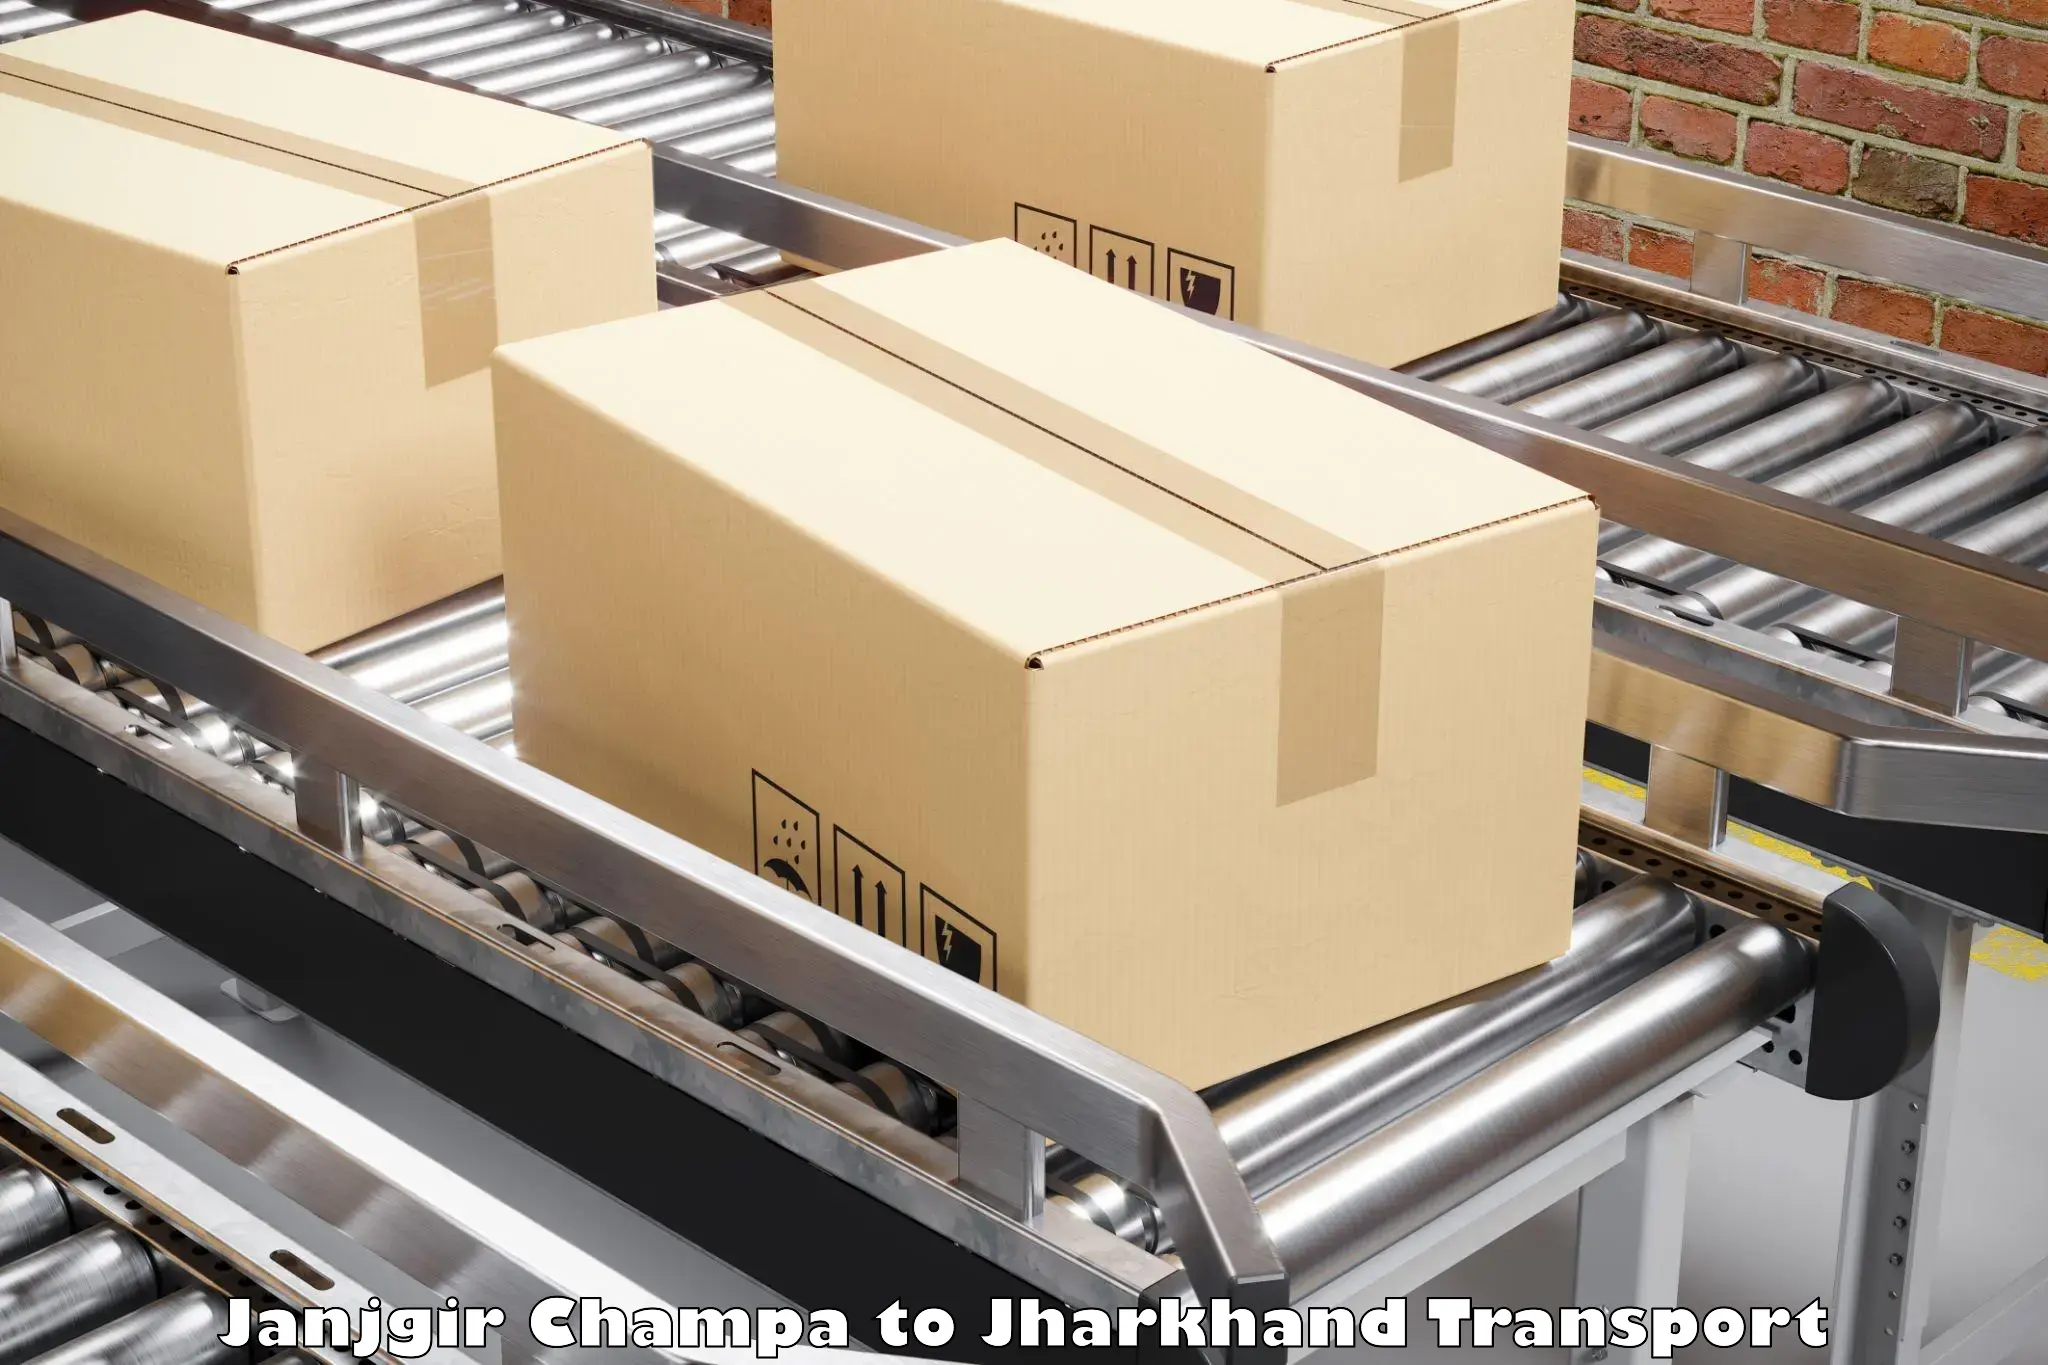 Shipping services in Janjgir Champa to Domchanch